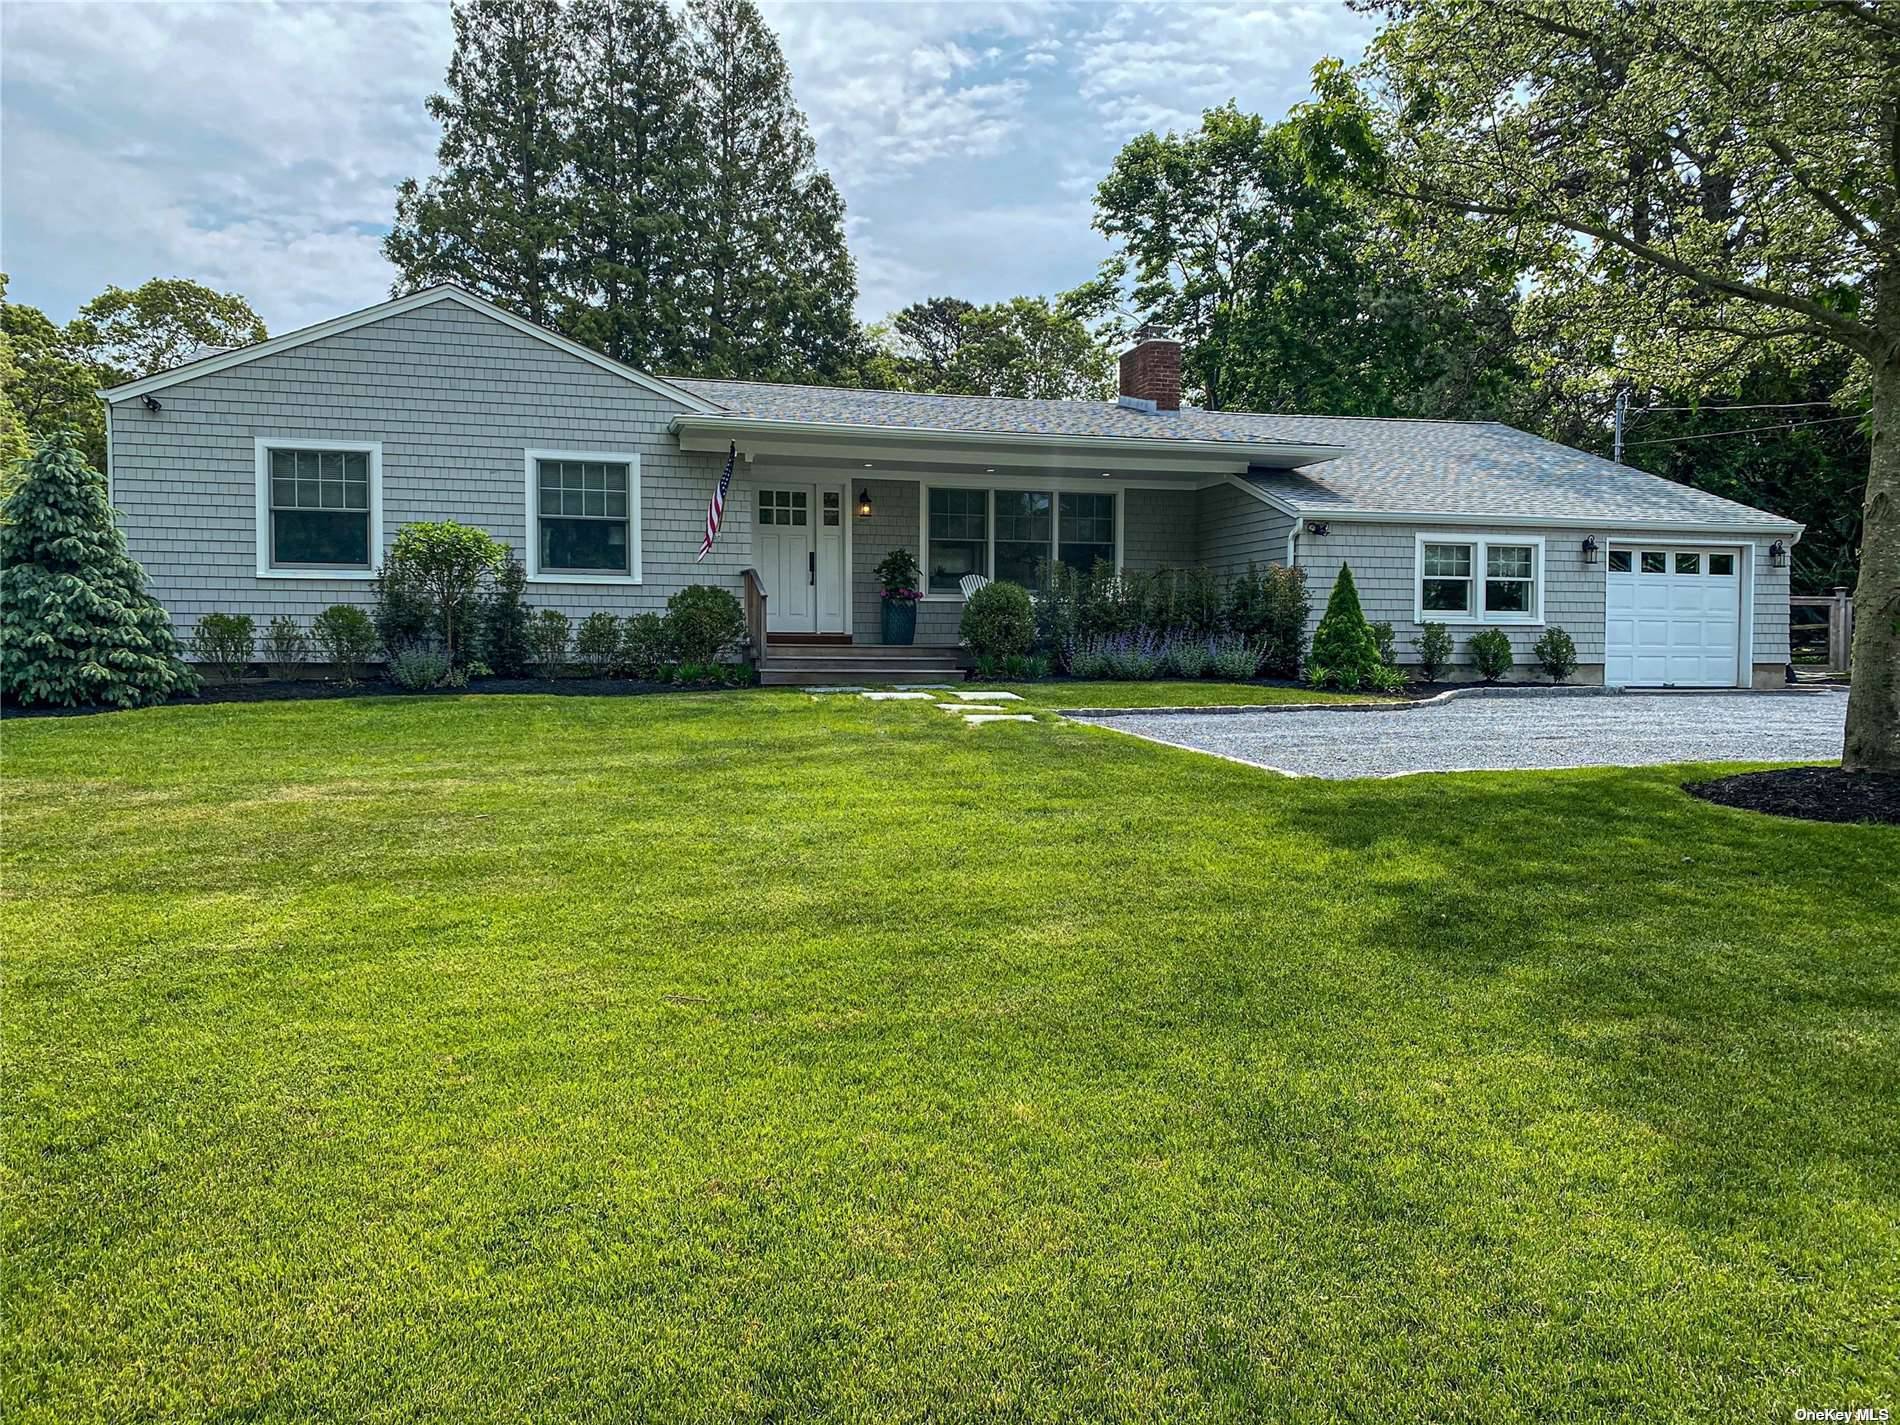 Renovated, immaculate ranch in the Village of Westhampton Beach with open living room, dining area and kitchen.